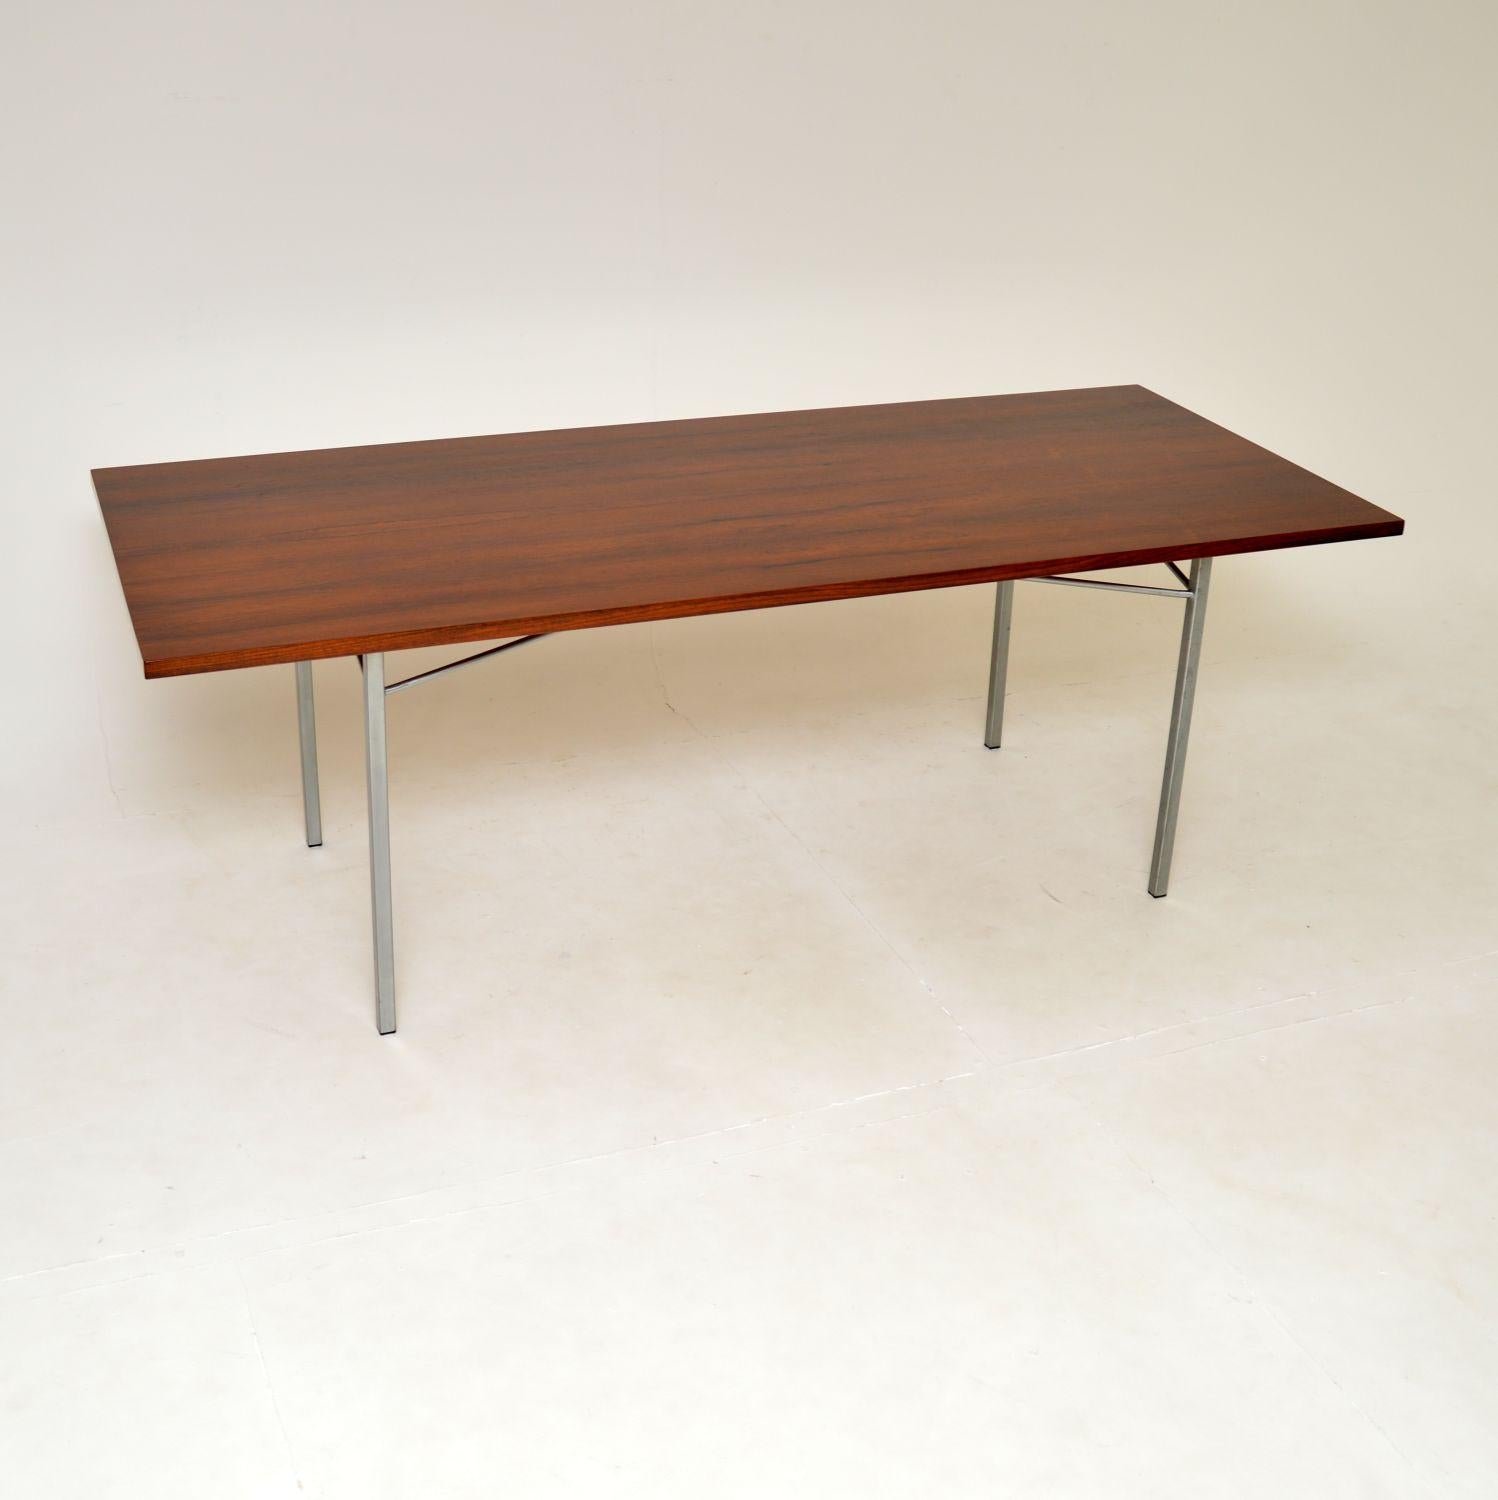 A fantastic vintage Danish dining table in wood with an interesting steel base. This was made in Denmark, it dates from around the 1960’s.

It is of amazing quality with a stylish design, it is also a very useful size. The top is long and quite